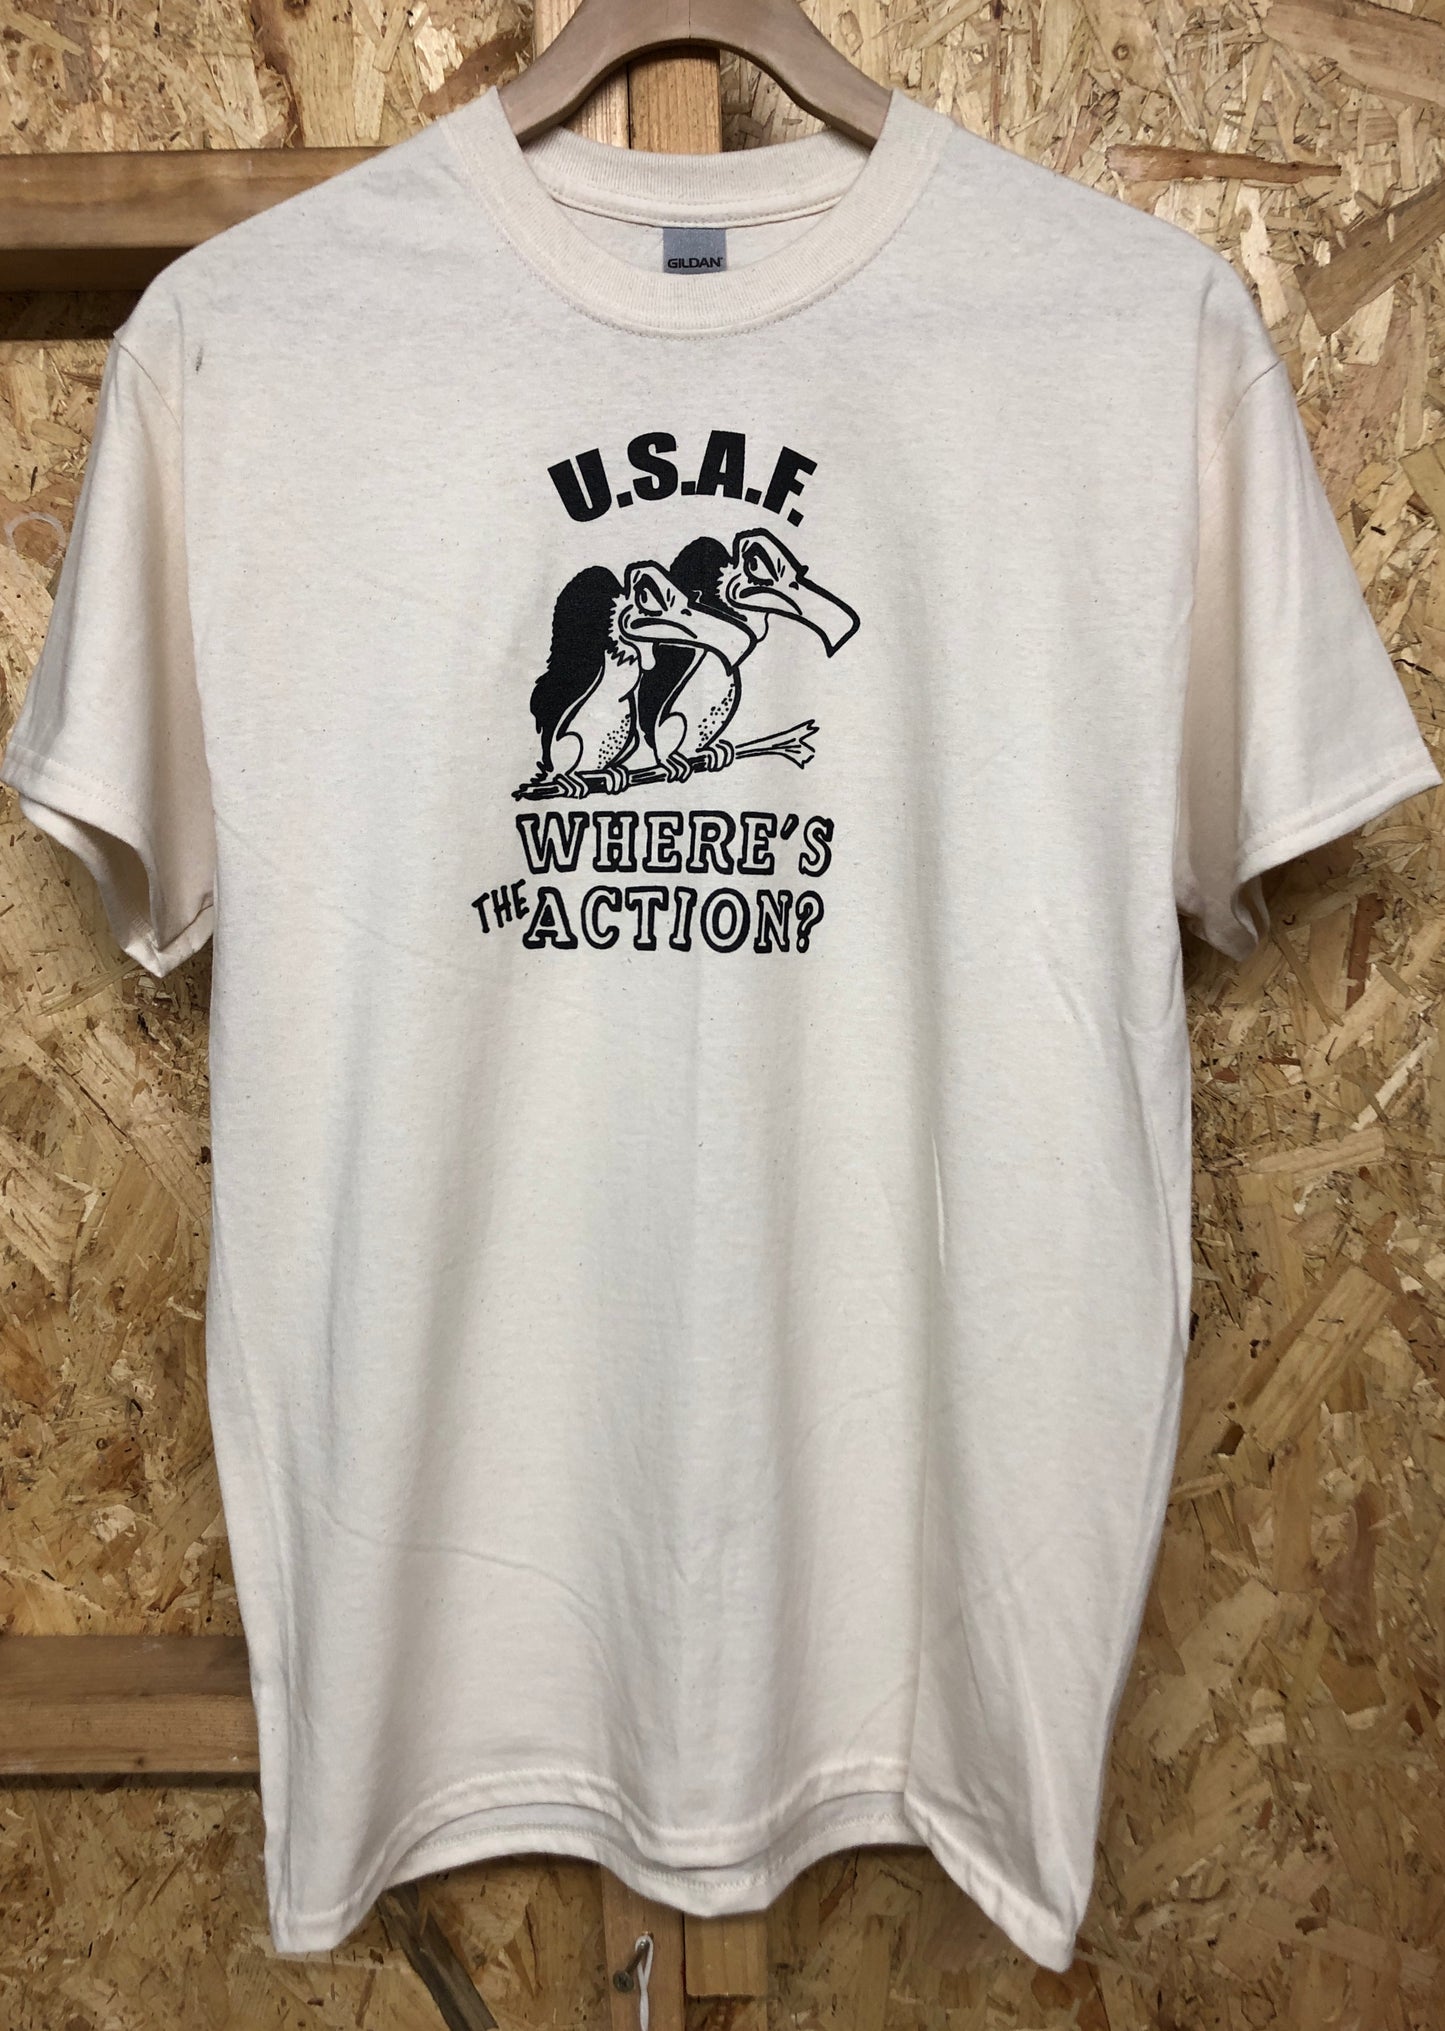 Vintage USAF Where’s The Action vulture T Shirt Rockabilly